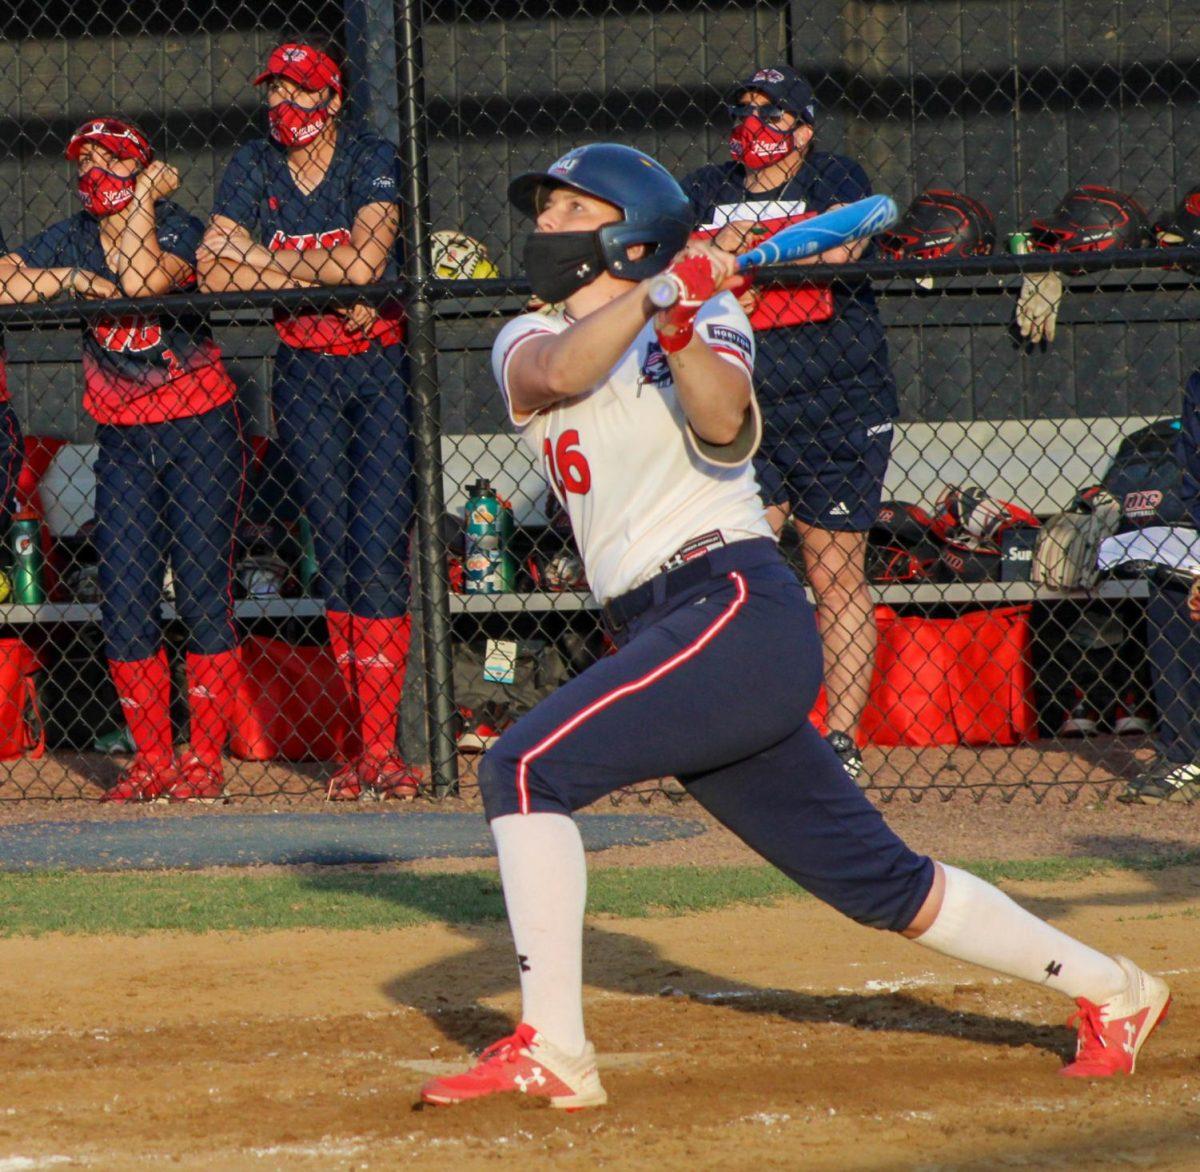 Natalie+Higgins+takes+a+swing+against+UIC.+Photo+Credit%3A+Tyler+Gallo